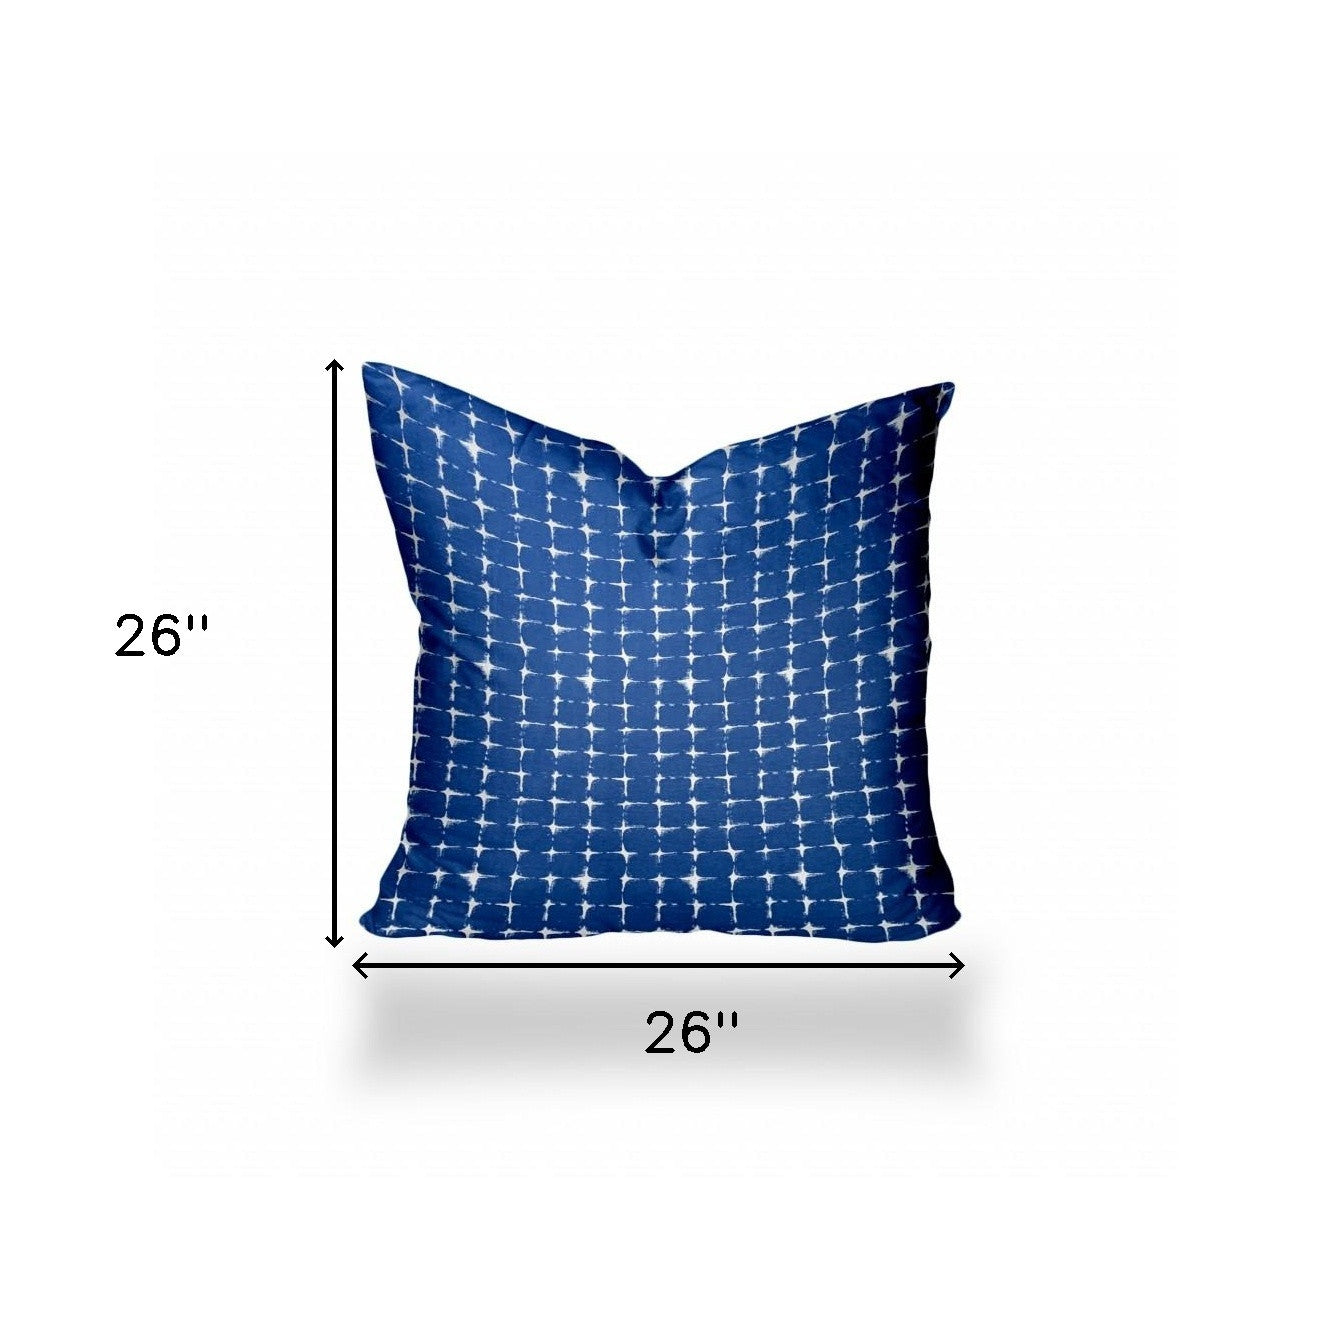 26" X 26" Blue And White Zippered Gingham Throw Indoor Outdoor Pillow Cover